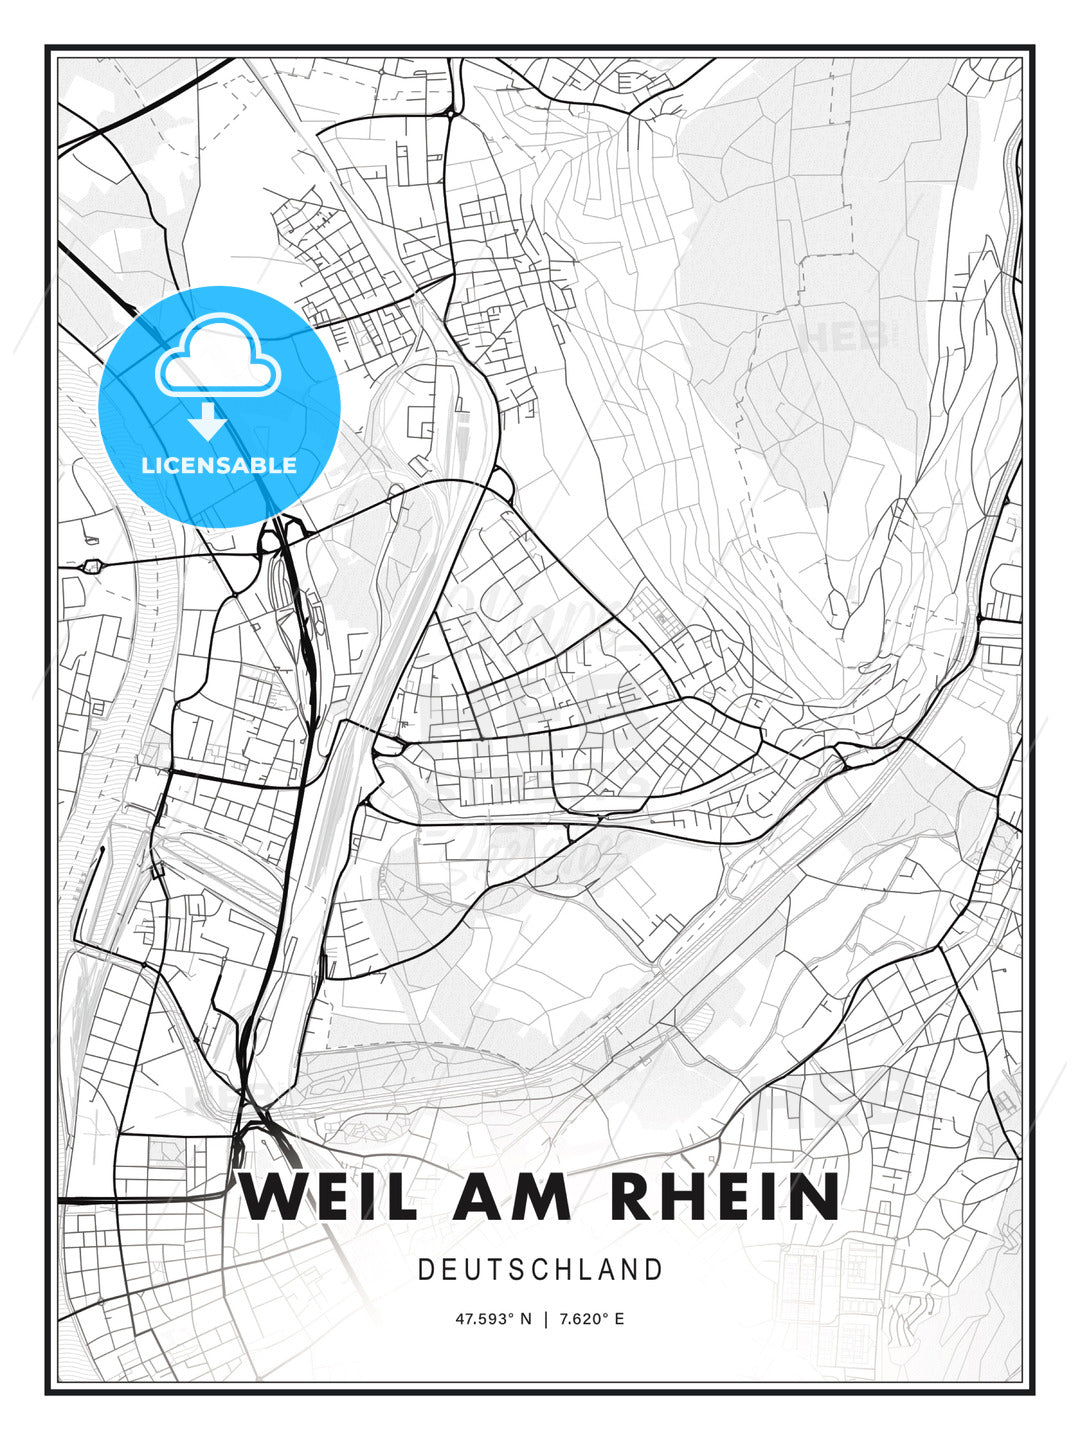 Weil am Rhein, Germany, Modern Print Template in Various Formats - HEBSTREITS Sketches